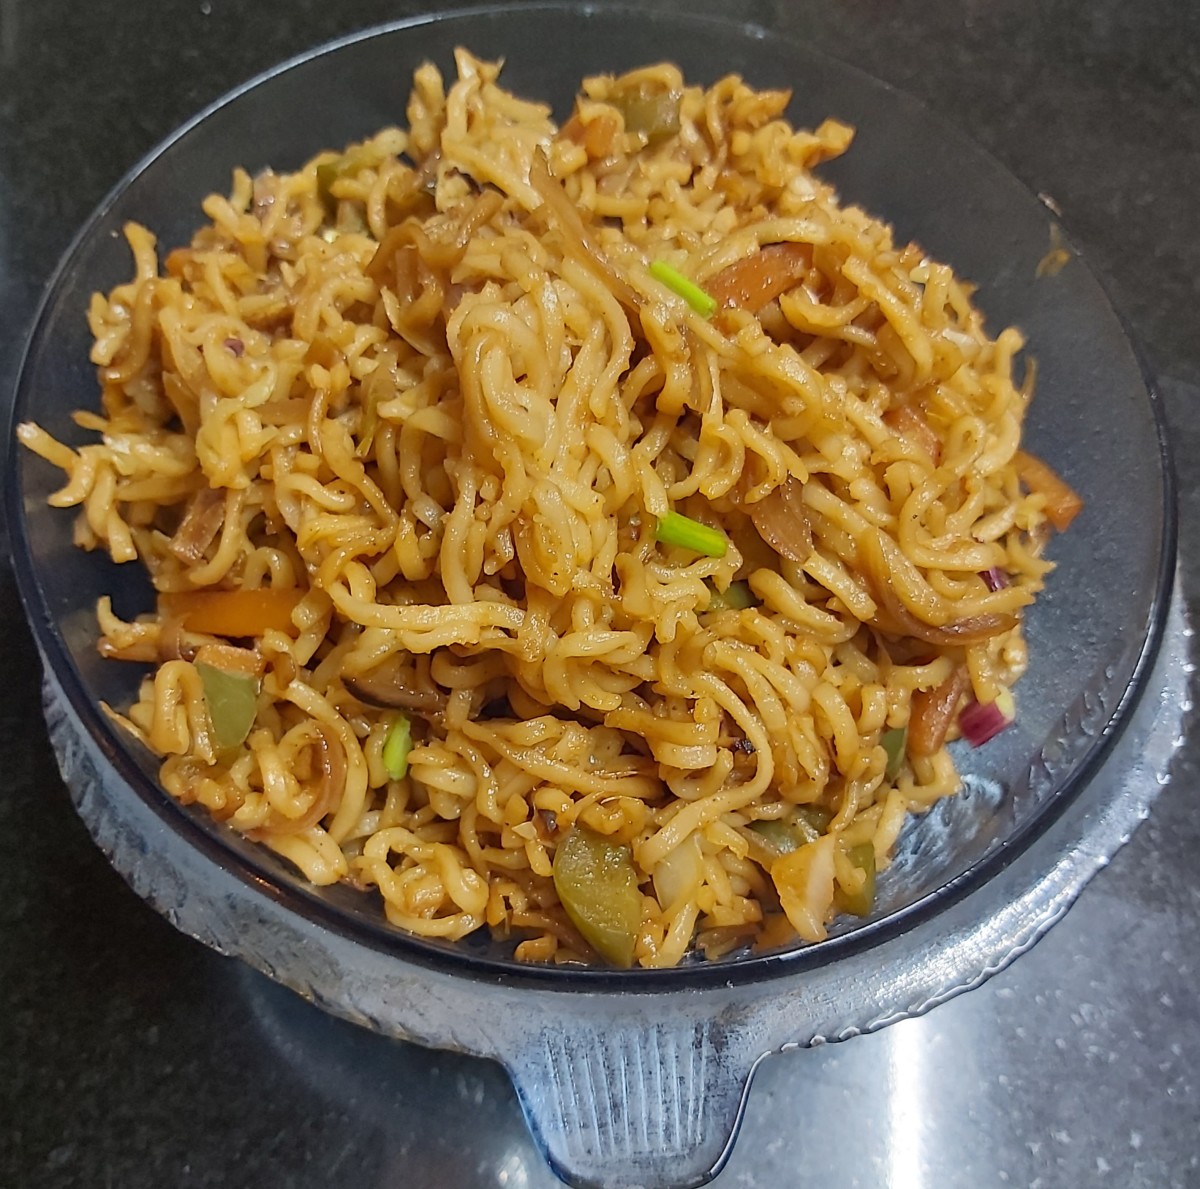 Tasty and healthy vegetable noodles are ready to serve.